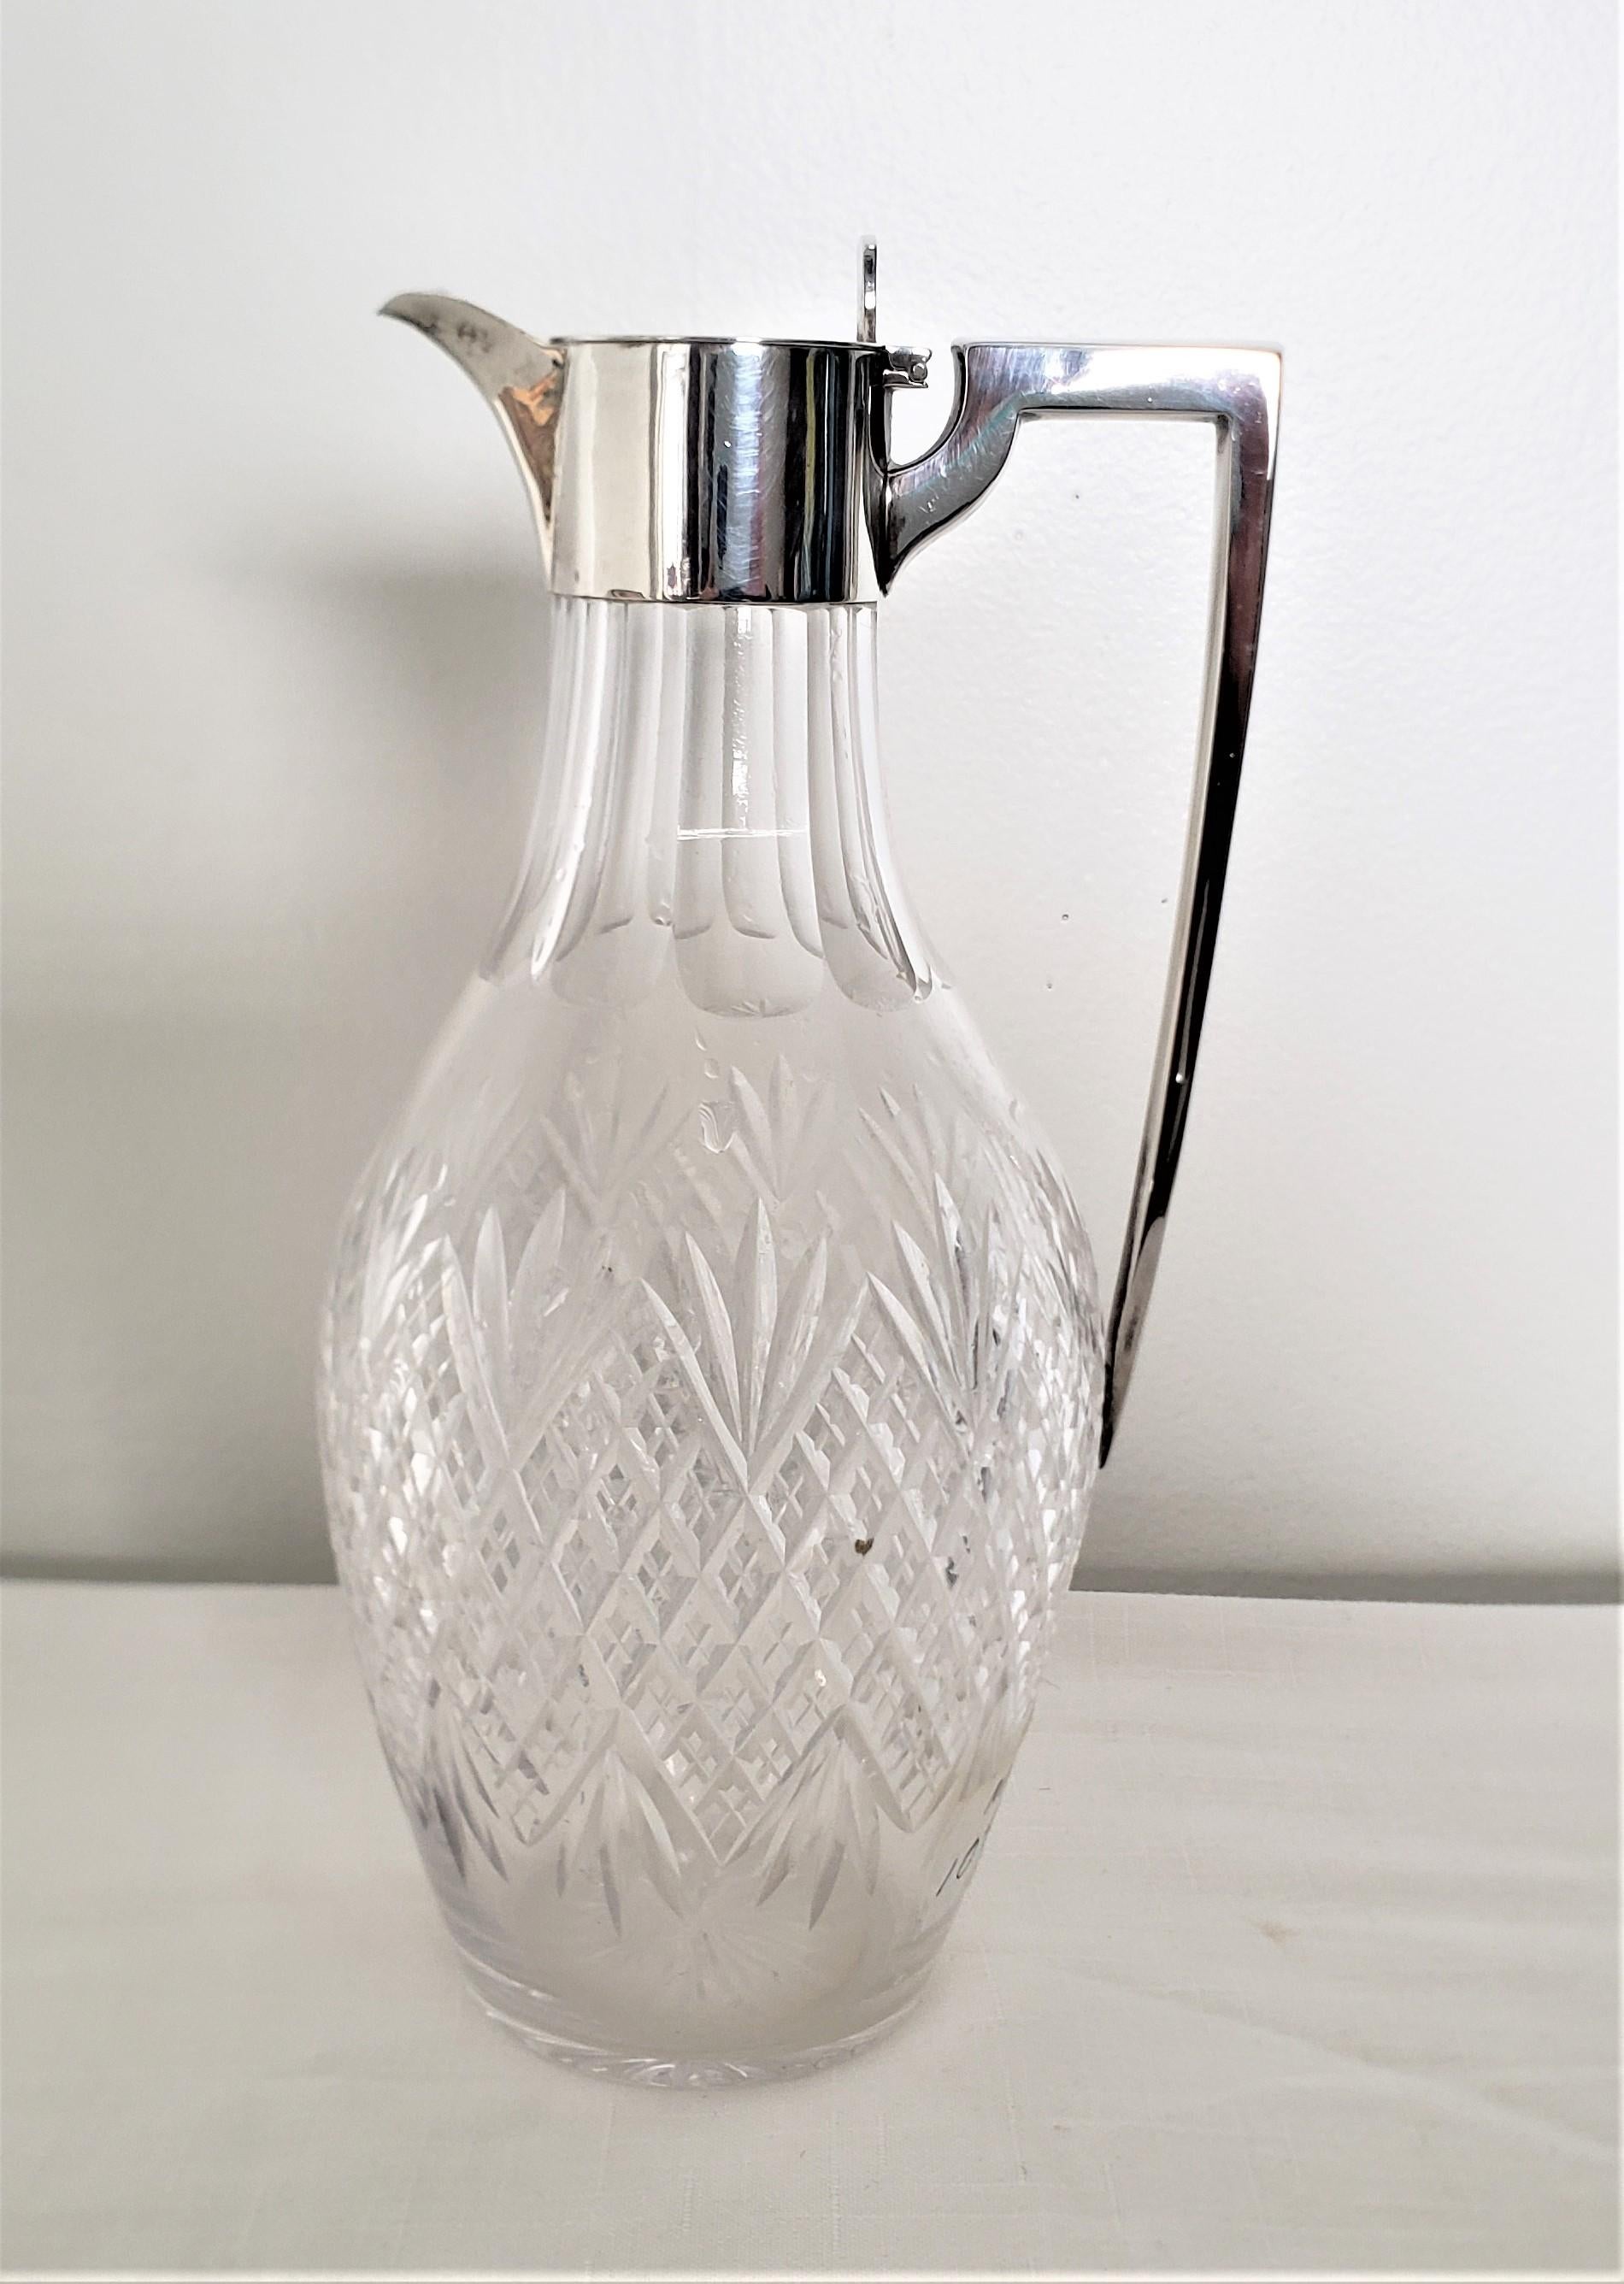 This antique cut glass and sterling silver claret jug is hallmarked by an unknown maker, but clearly originated from England and dates to approximately 1900 and done in the period Edwardian style. The top, neck and handle are done in sterling silver